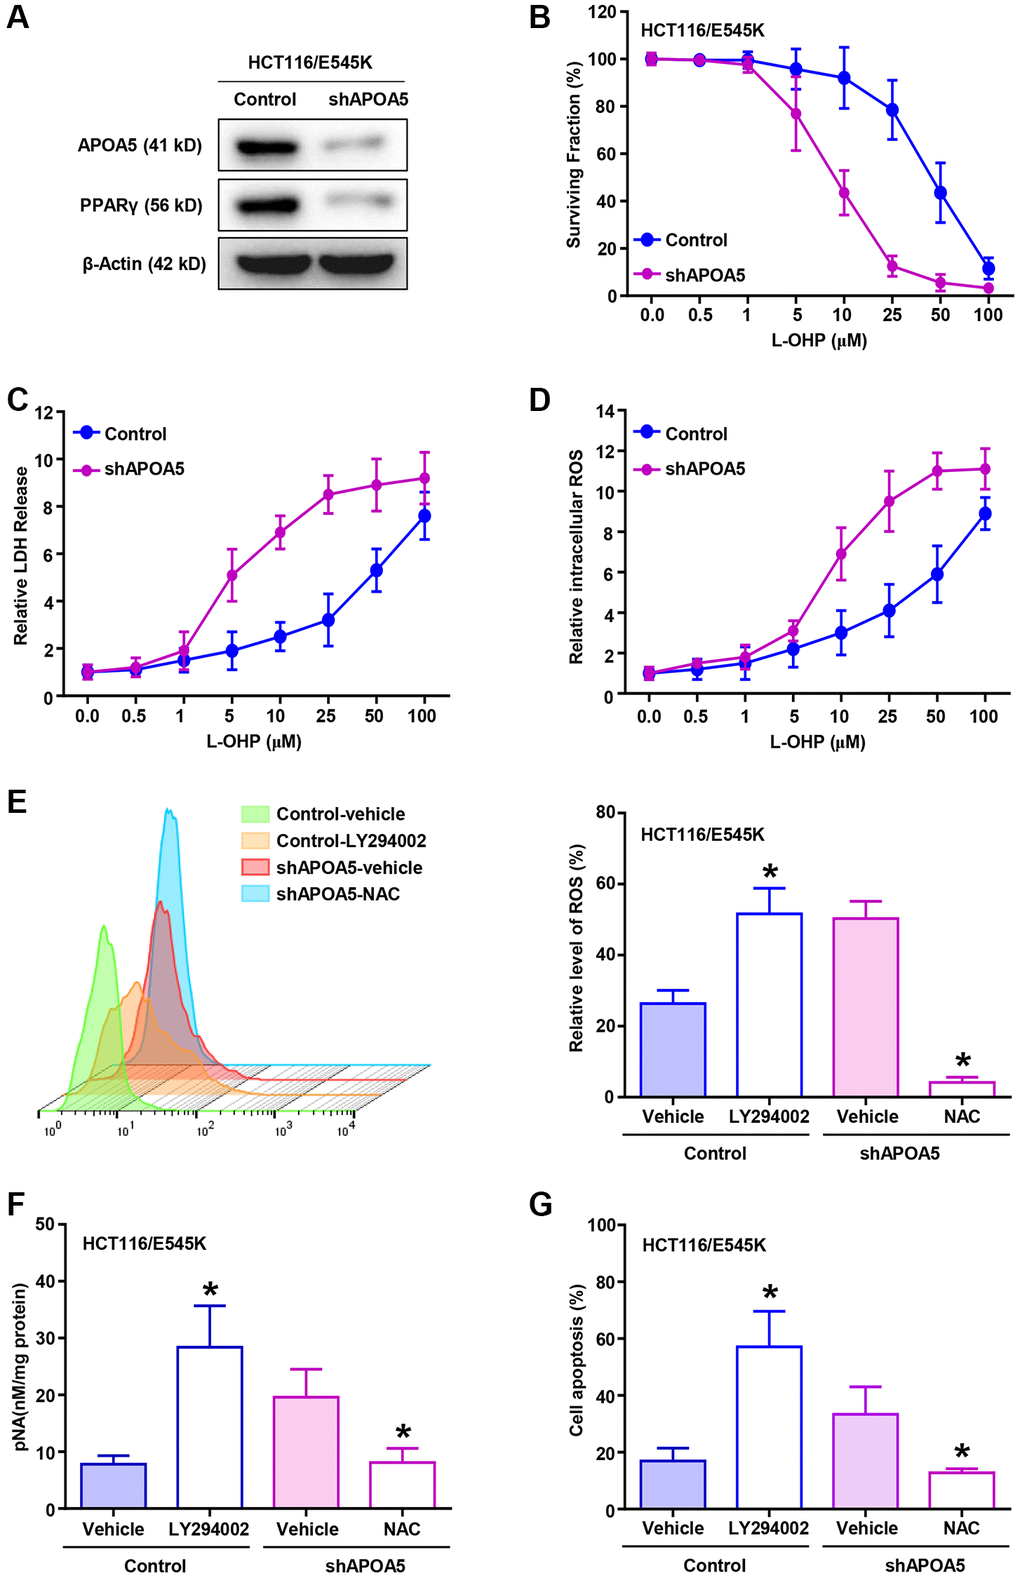 APOA5 alleviates ROS production in PIK3CA-E545K CRC cells with L-OHP treatment. (A) APOA5-silencing and control HCT116/E545K cells were lysed to measure APOA5 and PPARγ protein expression by Western blot analysis. (B) CCK-8 assays were performed to determine the growth inhibition rate in control and APOA5 silencing HCT116/E545K cells in the presence of increasing doses of L-OHP. (C) Established cells were treated for 48 h with L-OHP. Cell death was measured with the LDH assay as 100%* (LDH medium/(LDH medium + LDH lysate)). (D) Flow cytometry analysis was performed to evaluate the ROS production of APOA5 silenced and control cells with a gradient concentration of L-OHP treatment. Displayed as mean +/− SD (n = 3). (E) After combined treatment of L-OHP (2 μM), LY294002 (10 μM) and NAC (2 mM) as described, flow cytometry analysis was performed to evaluate ROS production of HCT116/E545K control and APOA5 silencing cells. (F) Caspase 3 activity was measured by pNA concentrations in HCT116/E545K control and APOA5 overexpressing cells, which was treated with L-OHP (10 μM) and LY294002 or NAC. (G) Flow cytometry was performed to determine cell apoptosis of HCT116/E545K control and APOA5 silencing cells, which was treated with L-OHP (2 μM) and LY294002 or NAC for 48 h. Results are representative of at least three independent experiments. p-values *.